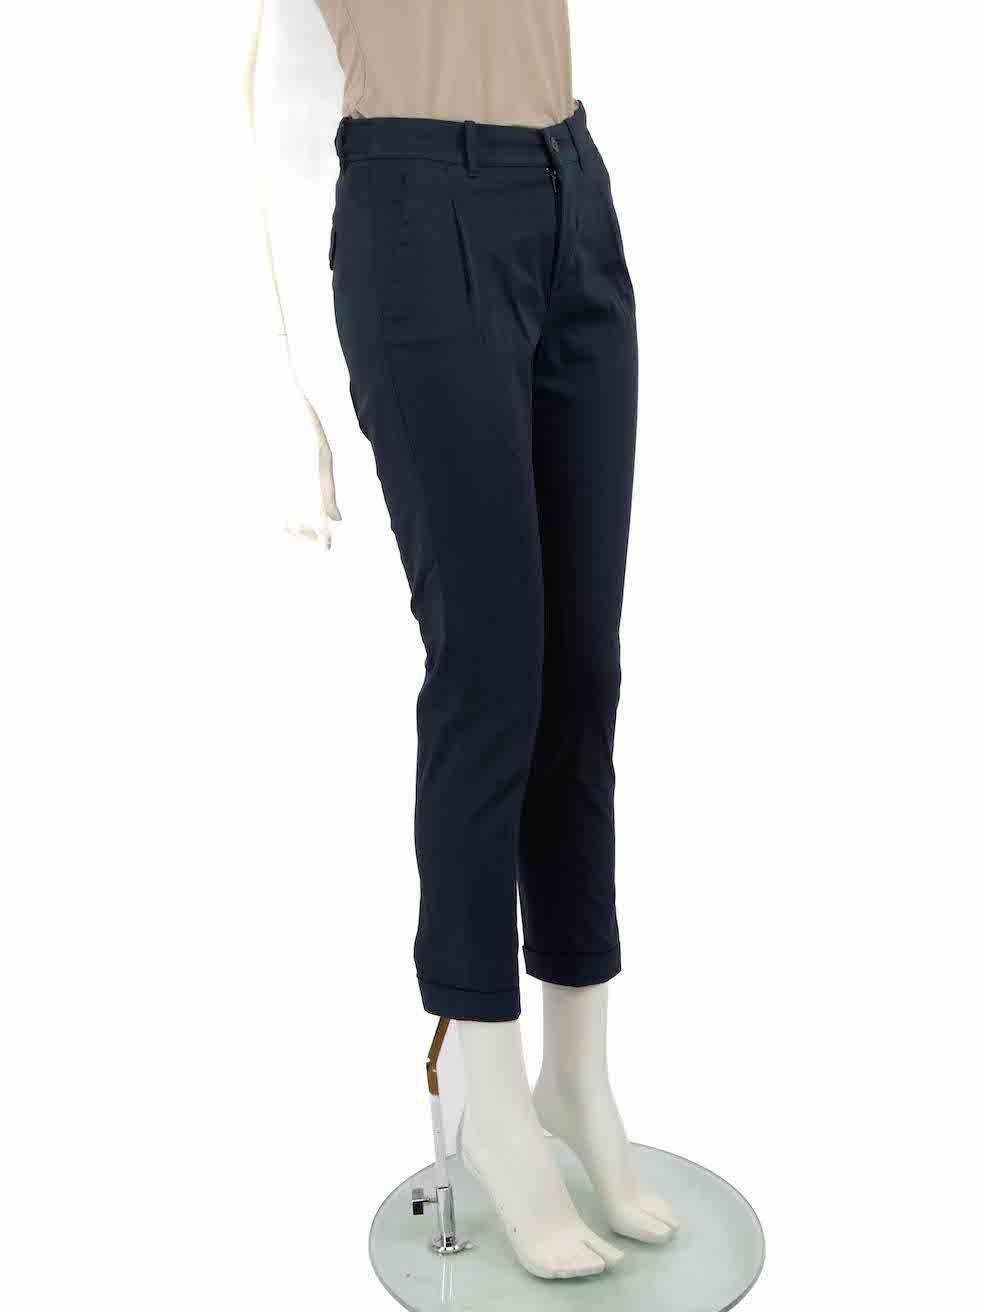 CONDITION is Very good. Minimal wear to trousers is evident. Minimal discolouration mark above the front button closure on this used Loro Piana designer resale item.
 
 
 
 Details
 
 
 Navy
 
 Cotton
 
 Trousers
 
 Slim fit
 
 Low rise
 
 Cropped